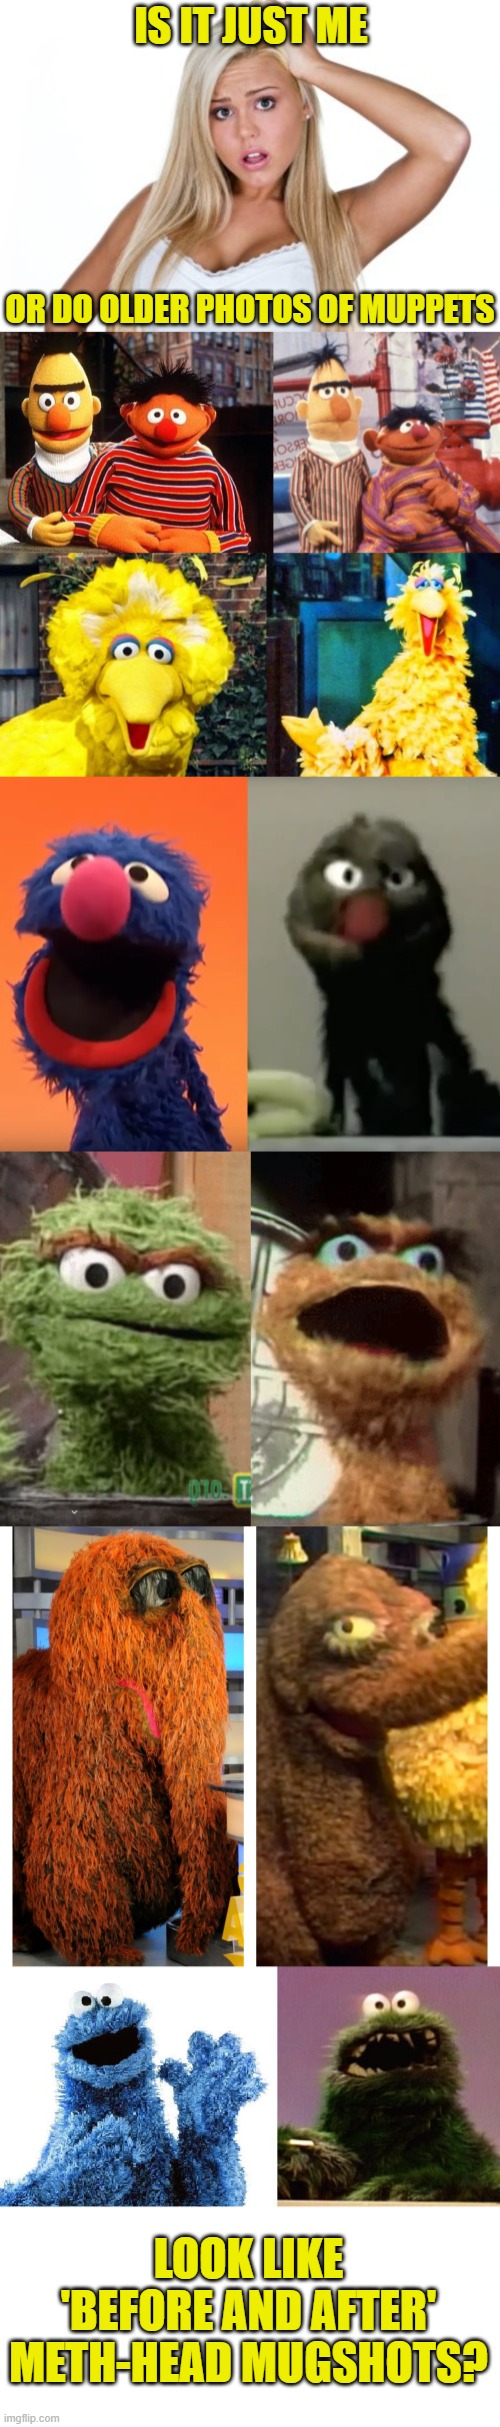 Sesame street; not even once! |  IS IT JUST ME; OR DO OLDER PHOTOS OF MUPPETS; LOOK LIKE 'BEFORE AND AFTER' METH-HEAD MUGSHOTS? | image tagged in dumb blonde,sesame street,meth,mugshot,memes | made w/ Imgflip meme maker